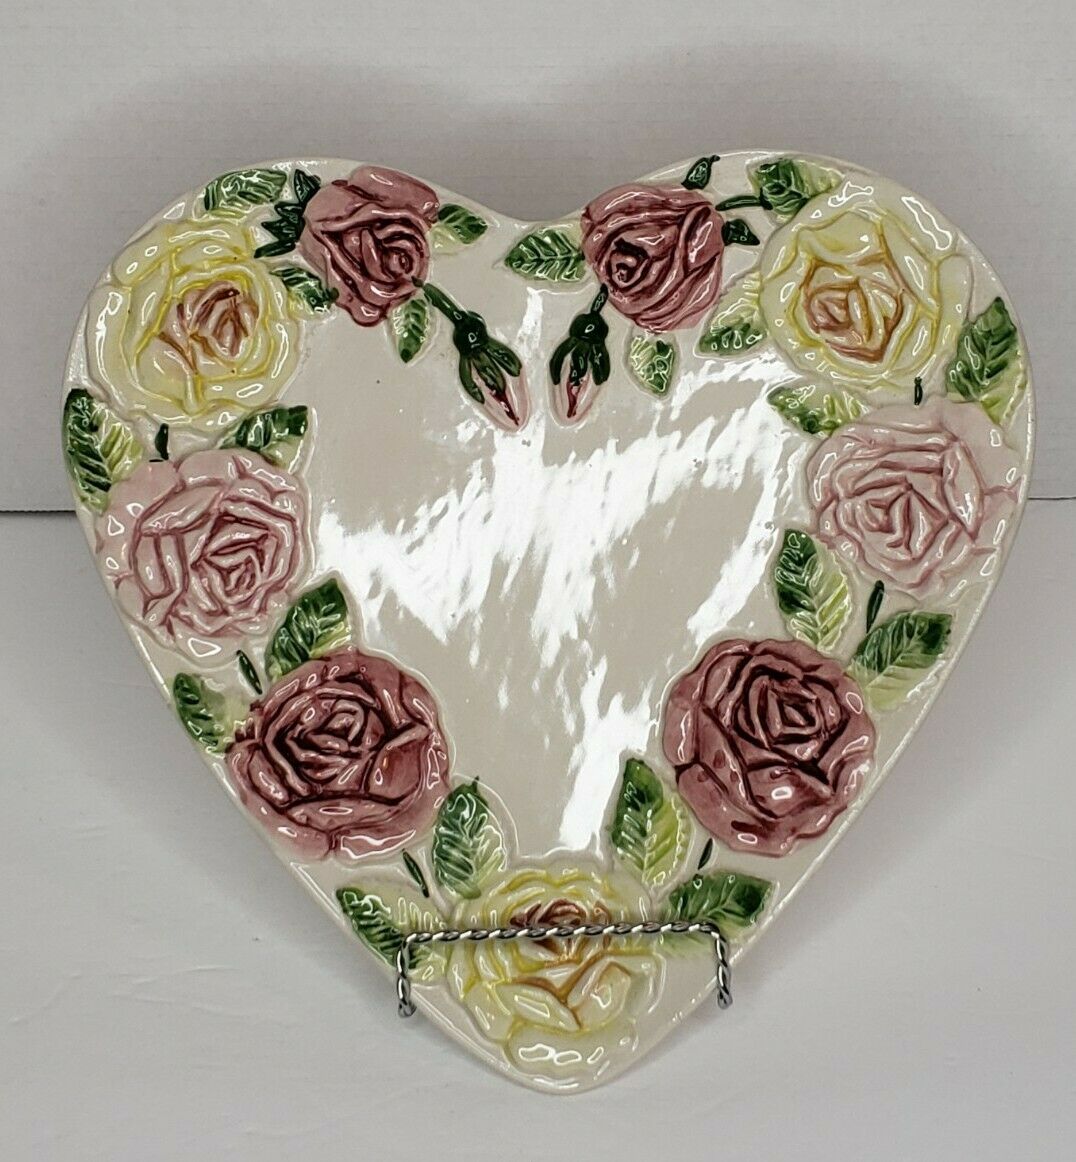 Red Pink Roses Ceramic Heart Shaped Plate Decor/serving Style Made In Portugal